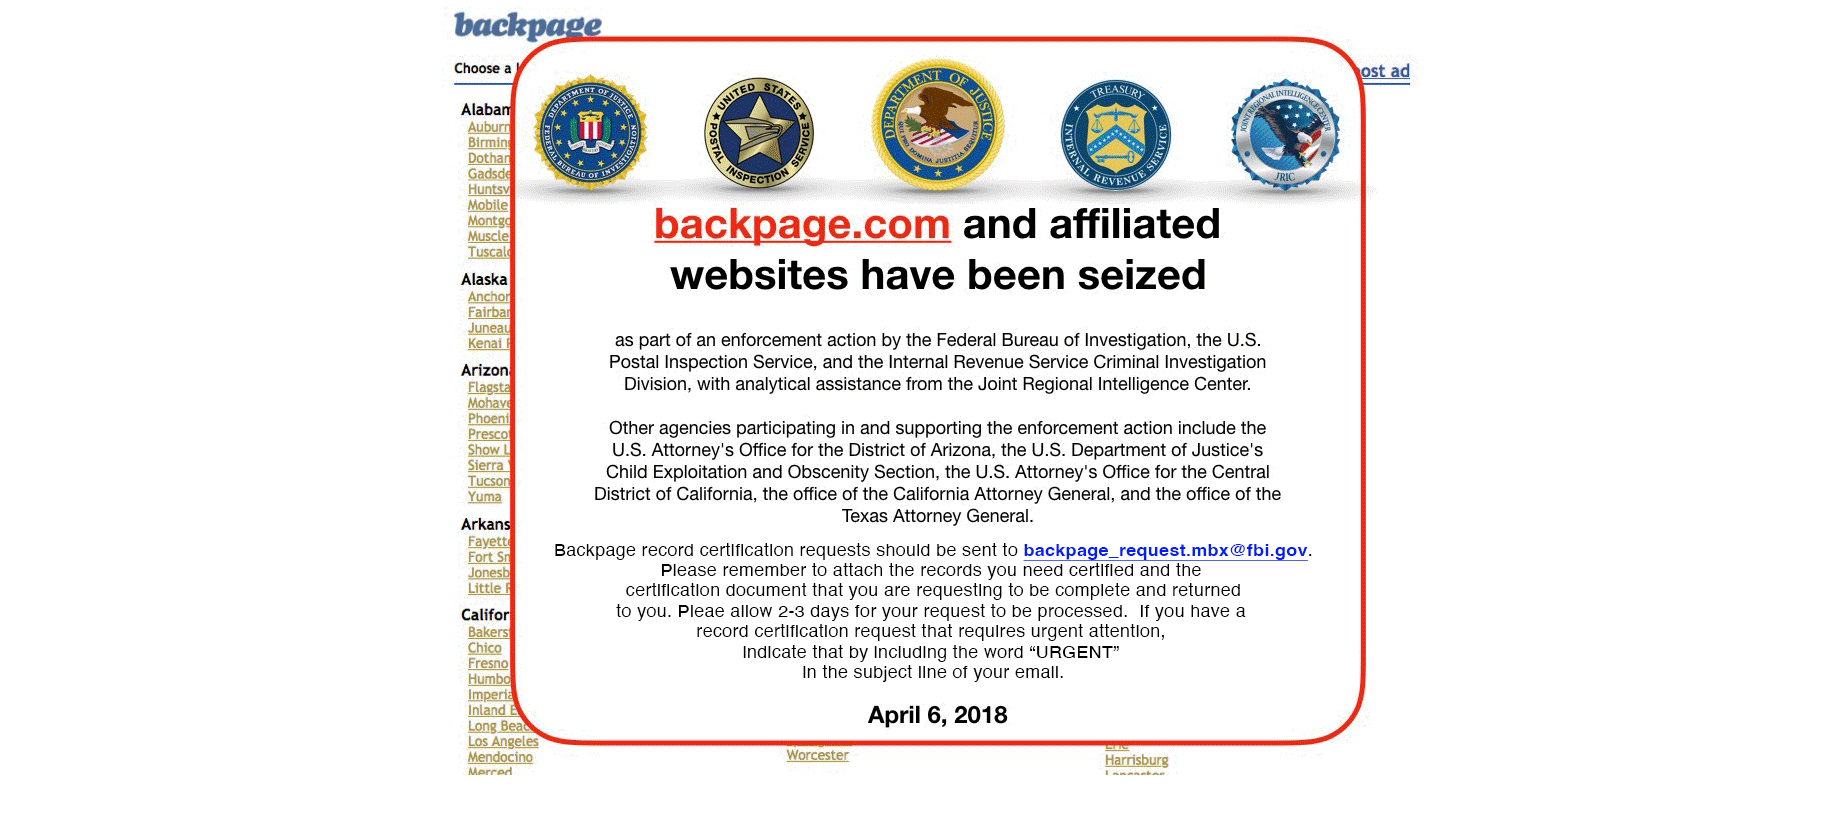 BonePage.com replaced Backpage.com following the DOJ seizure of their website in 2018.